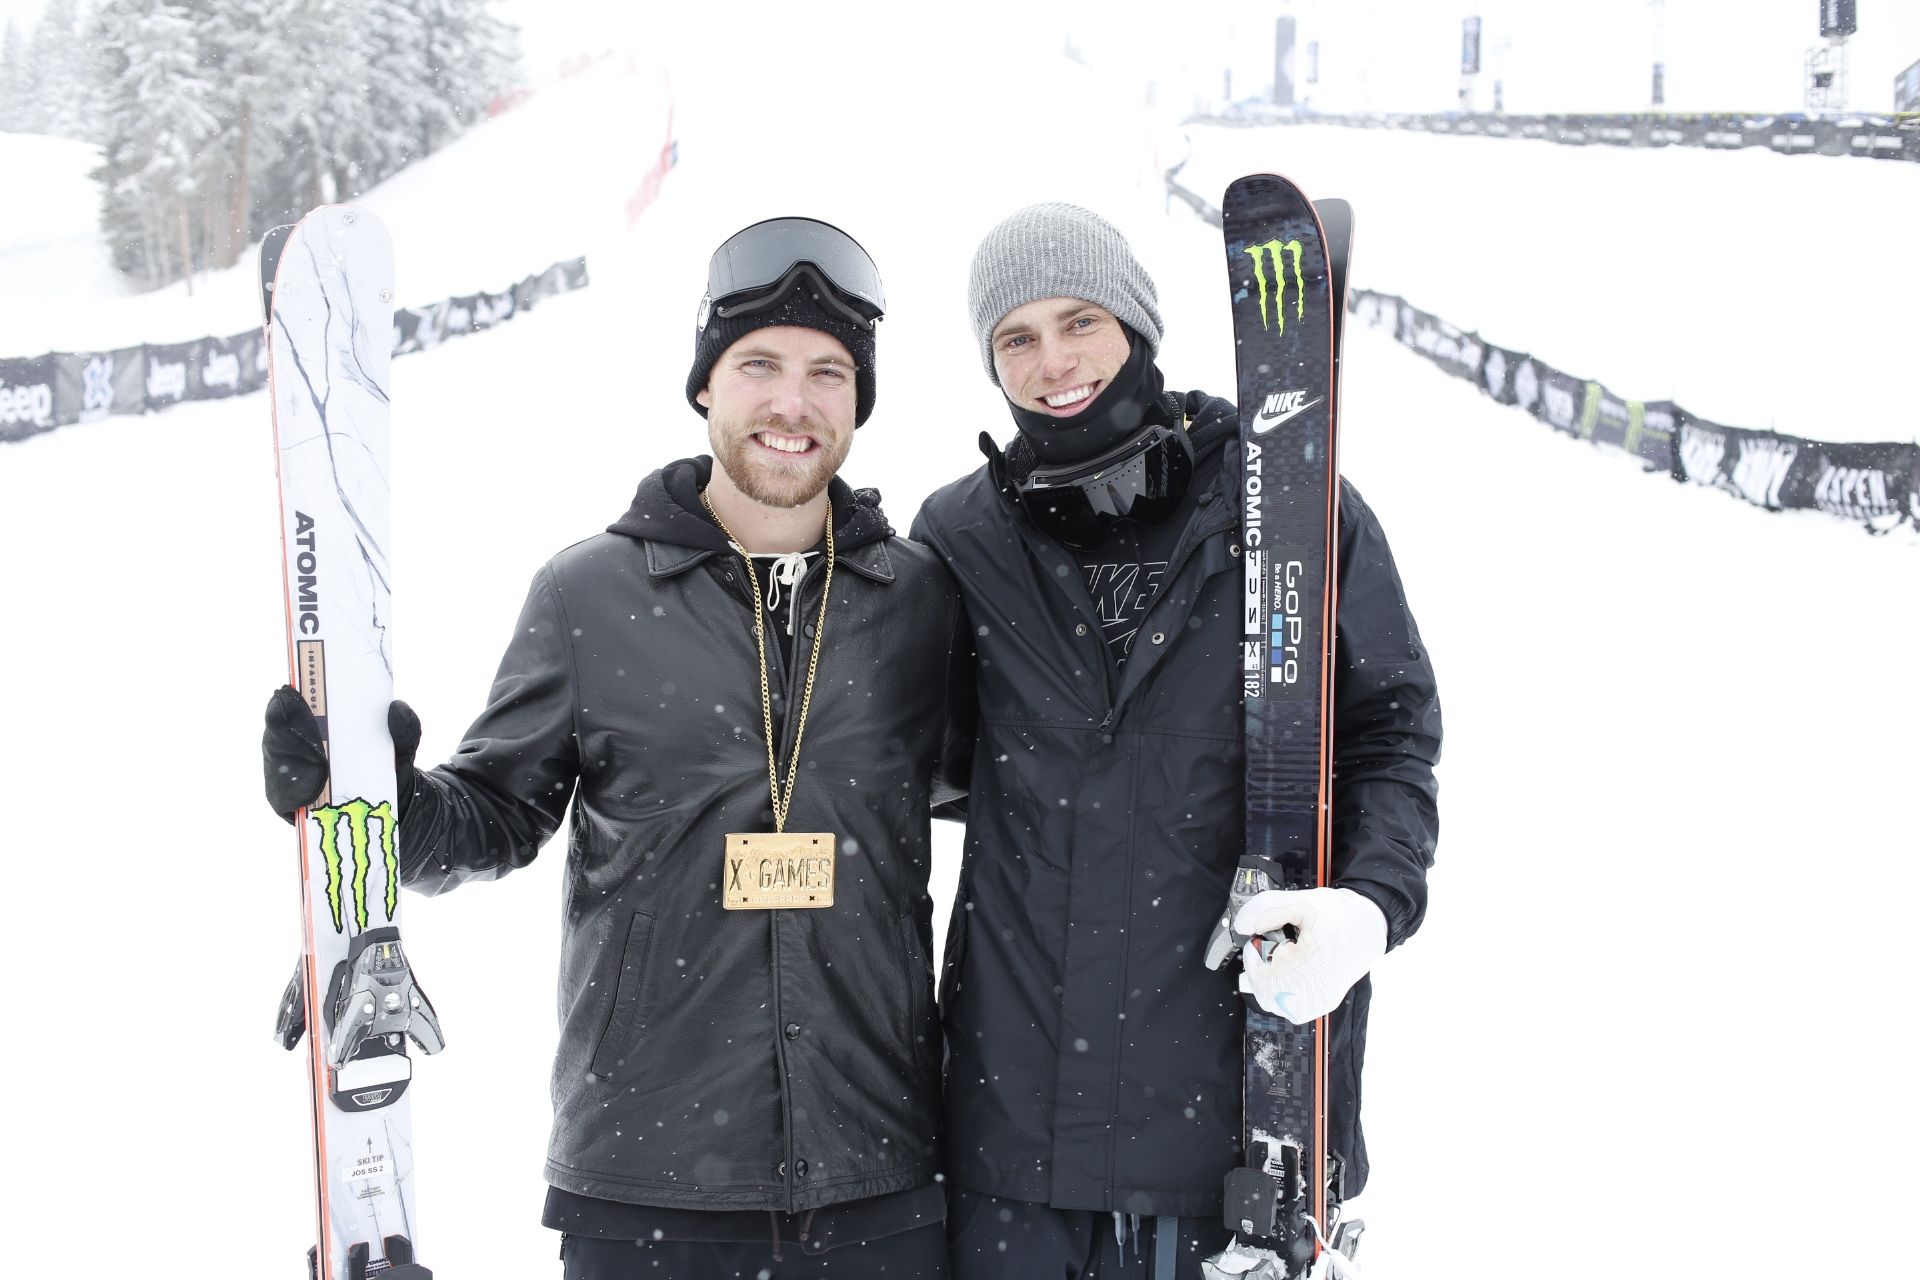 Monster Energy's Jossi Wells and Gus Kenworthy to compete at X Games Oslo 2016